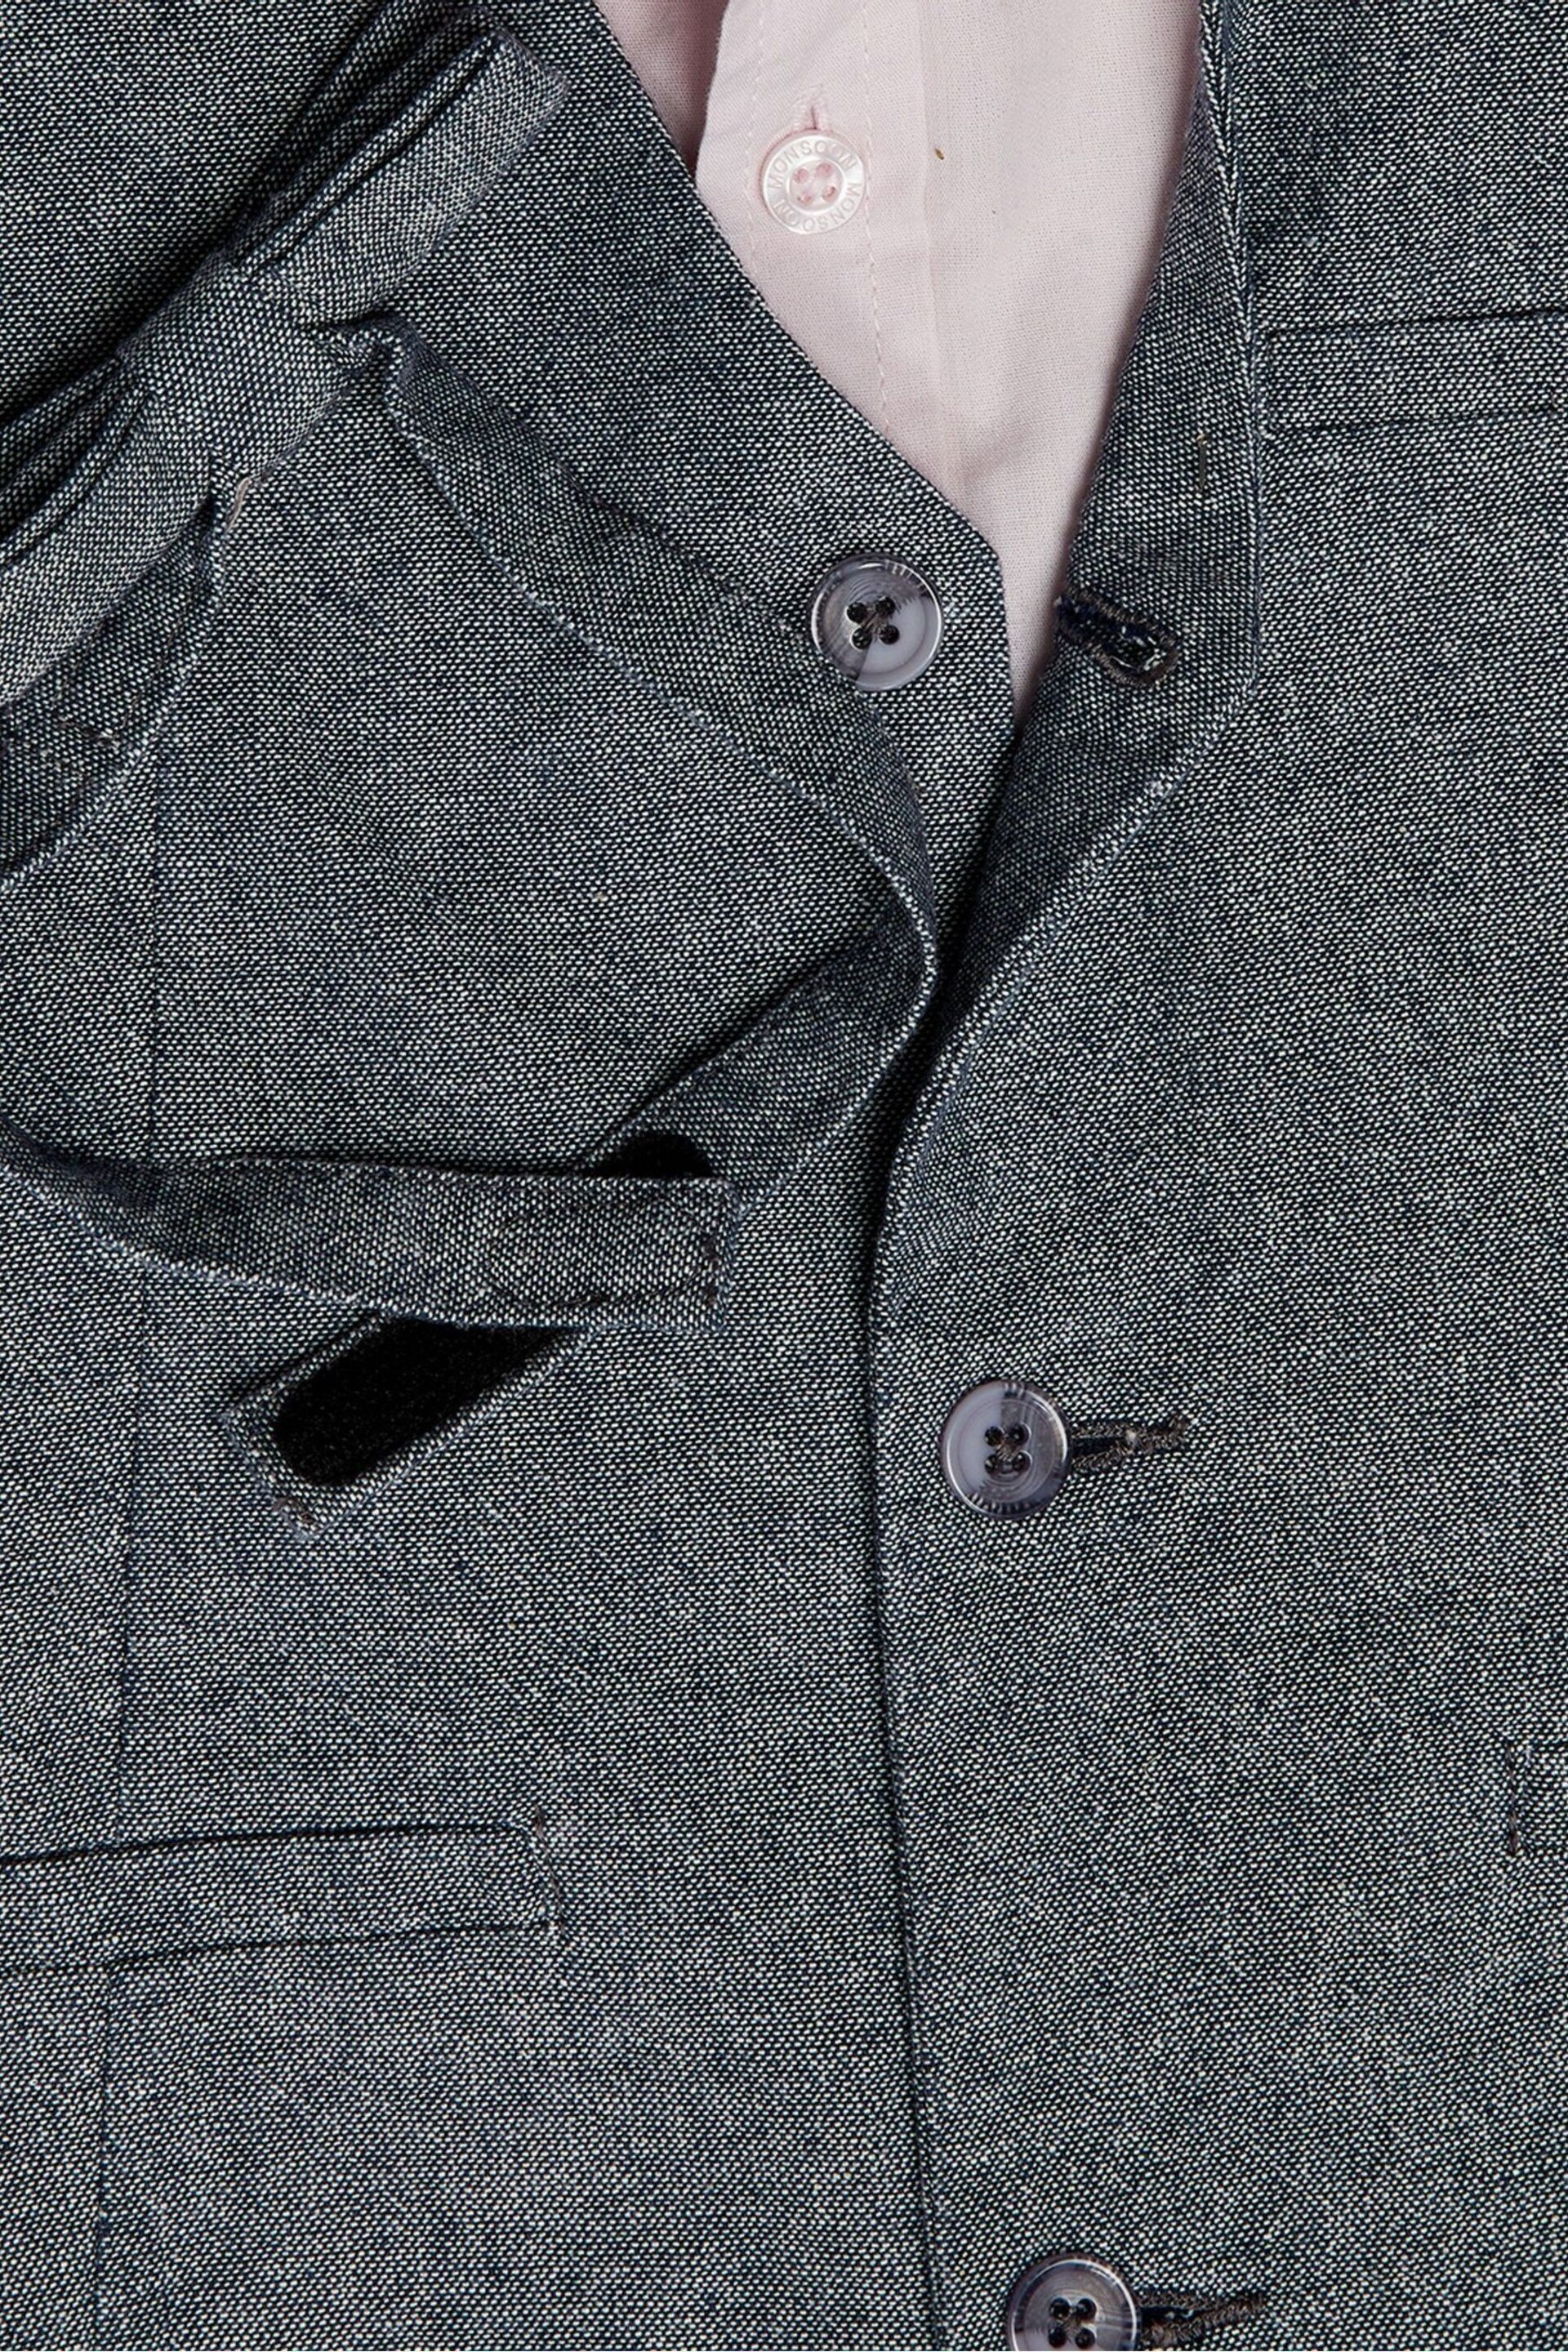 Monsoon Grey 4 Piece Suit - Image 2 of 2